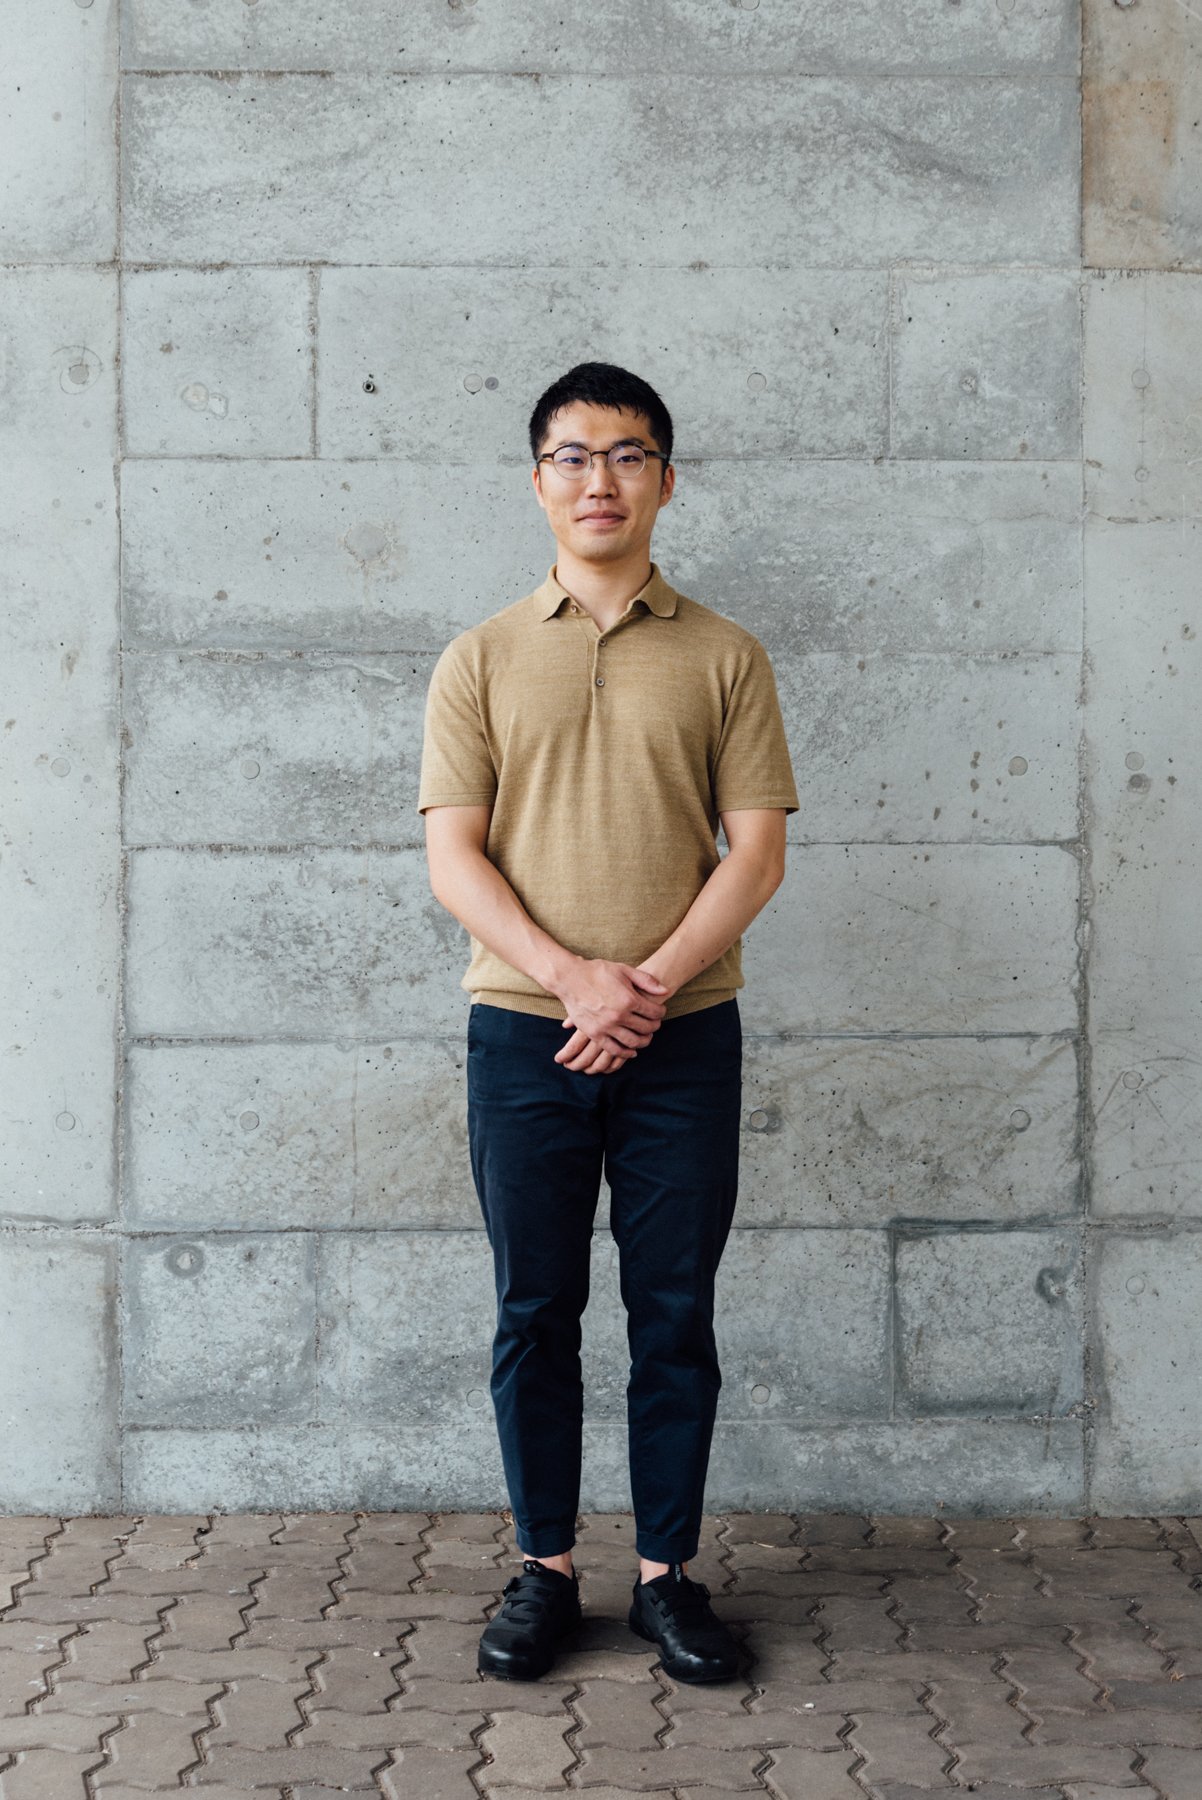  Shirt:  70% LINEN 30% POLYESTER  Trousers:  98% COTTON 2% POLYURETHANE  “Both were purchased in the summer of 2018 when I moved to Tokyo. The polo shirt is going to a thrift shop as it is getting furballs on it, and the trousers are going to be disc